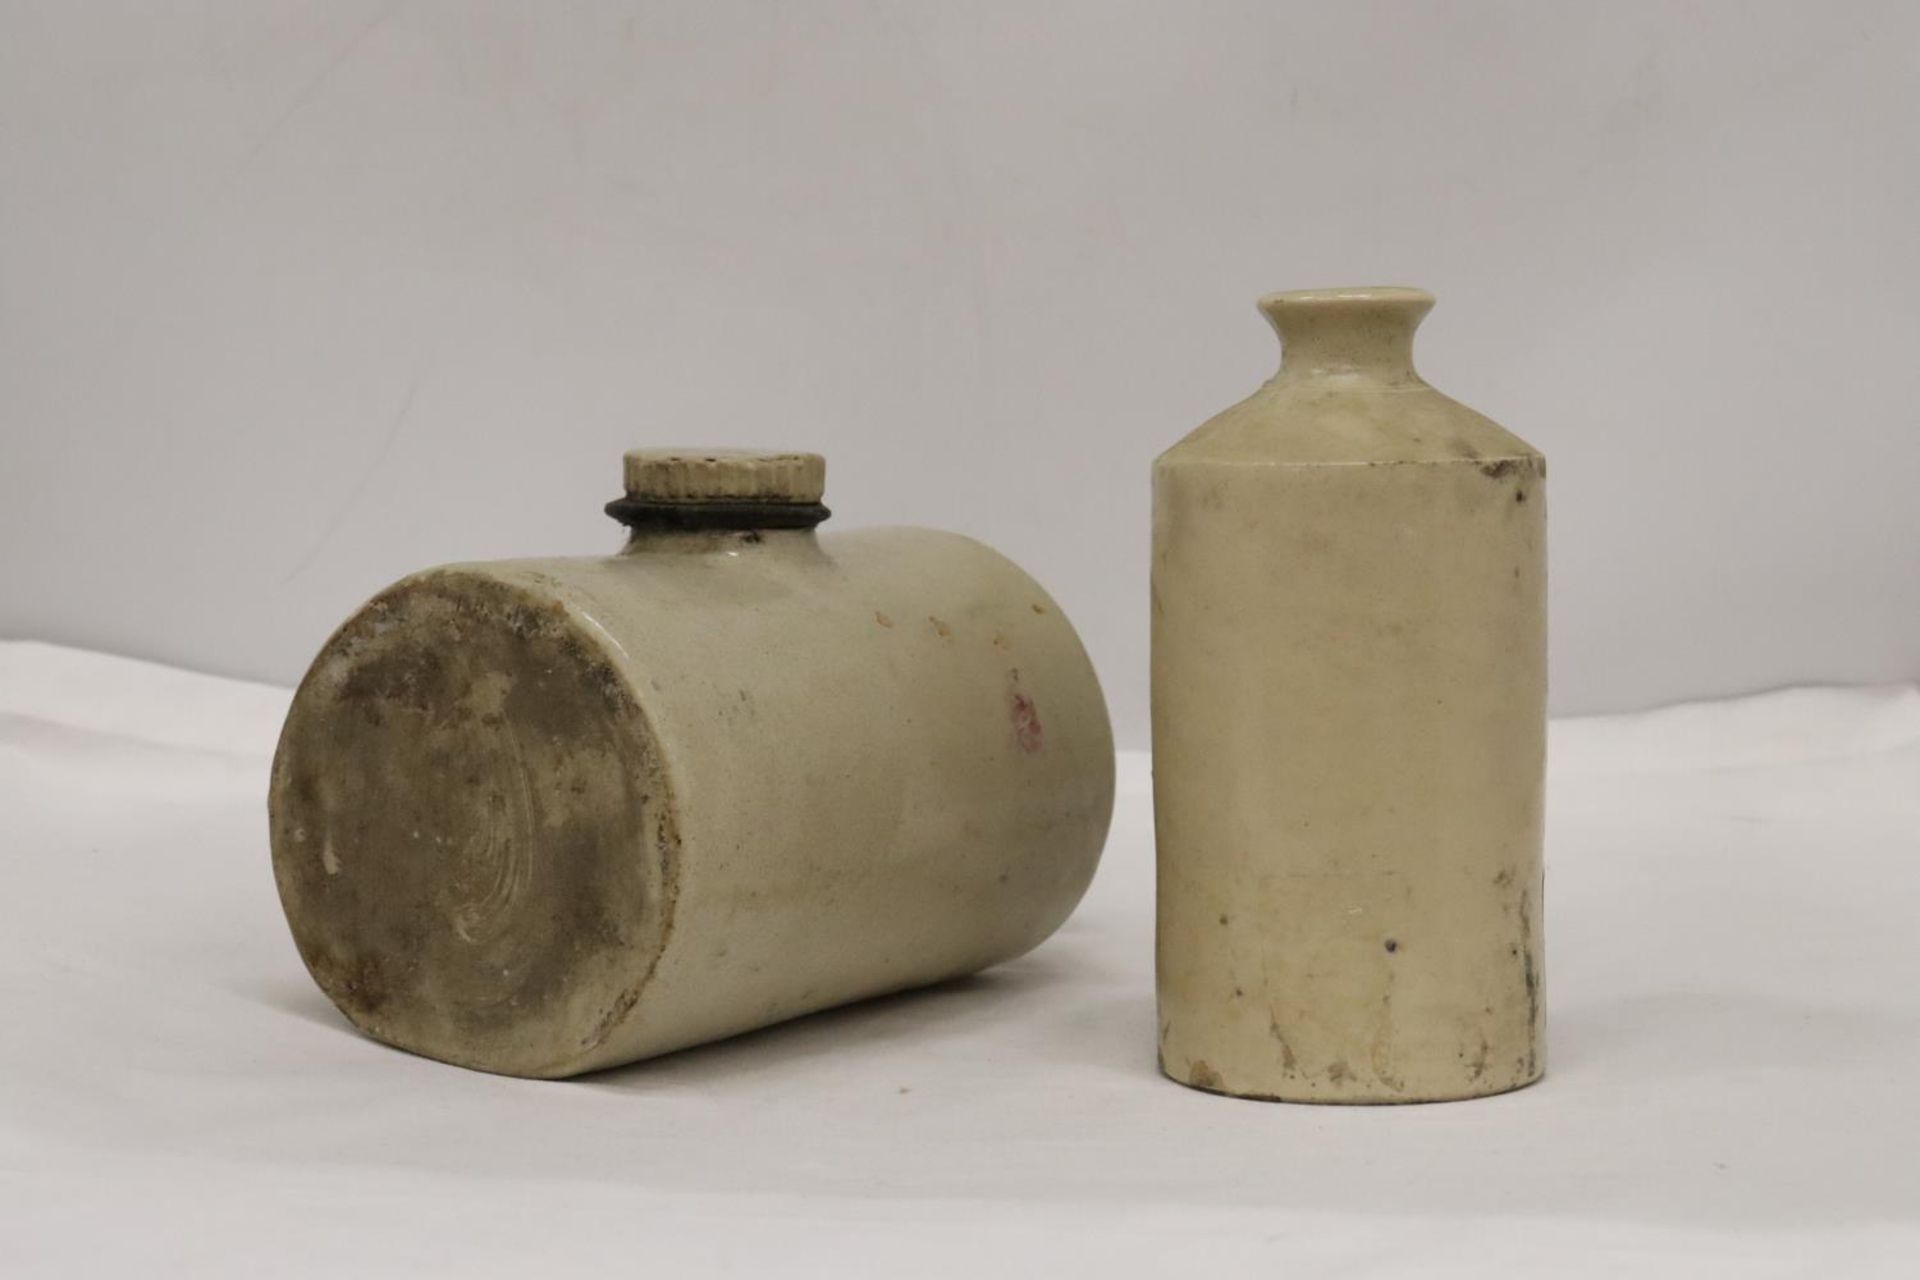 AN ANTIQUE STONEWARE LARGE INK BOTTLE TOGETHER WITH A STONE BED WARMER - Image 4 of 6